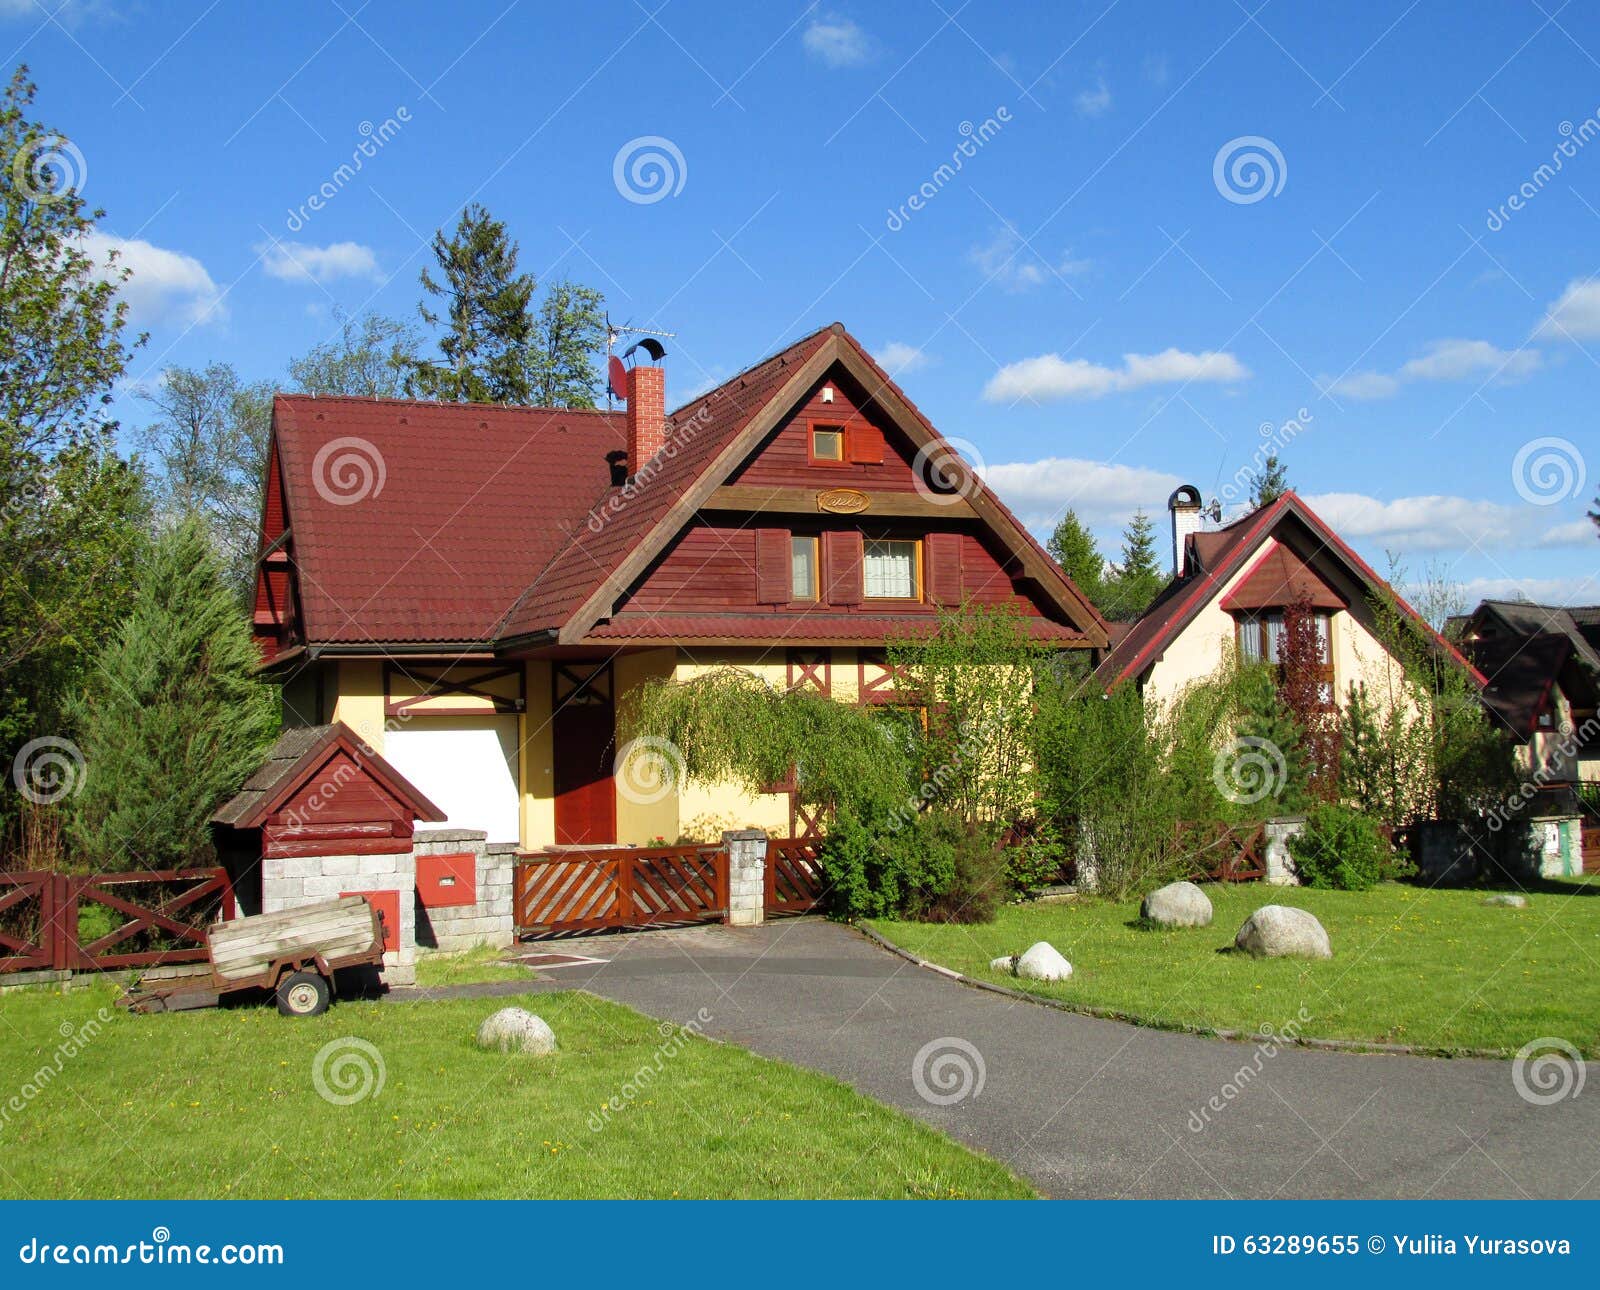 idylic scene with rural house